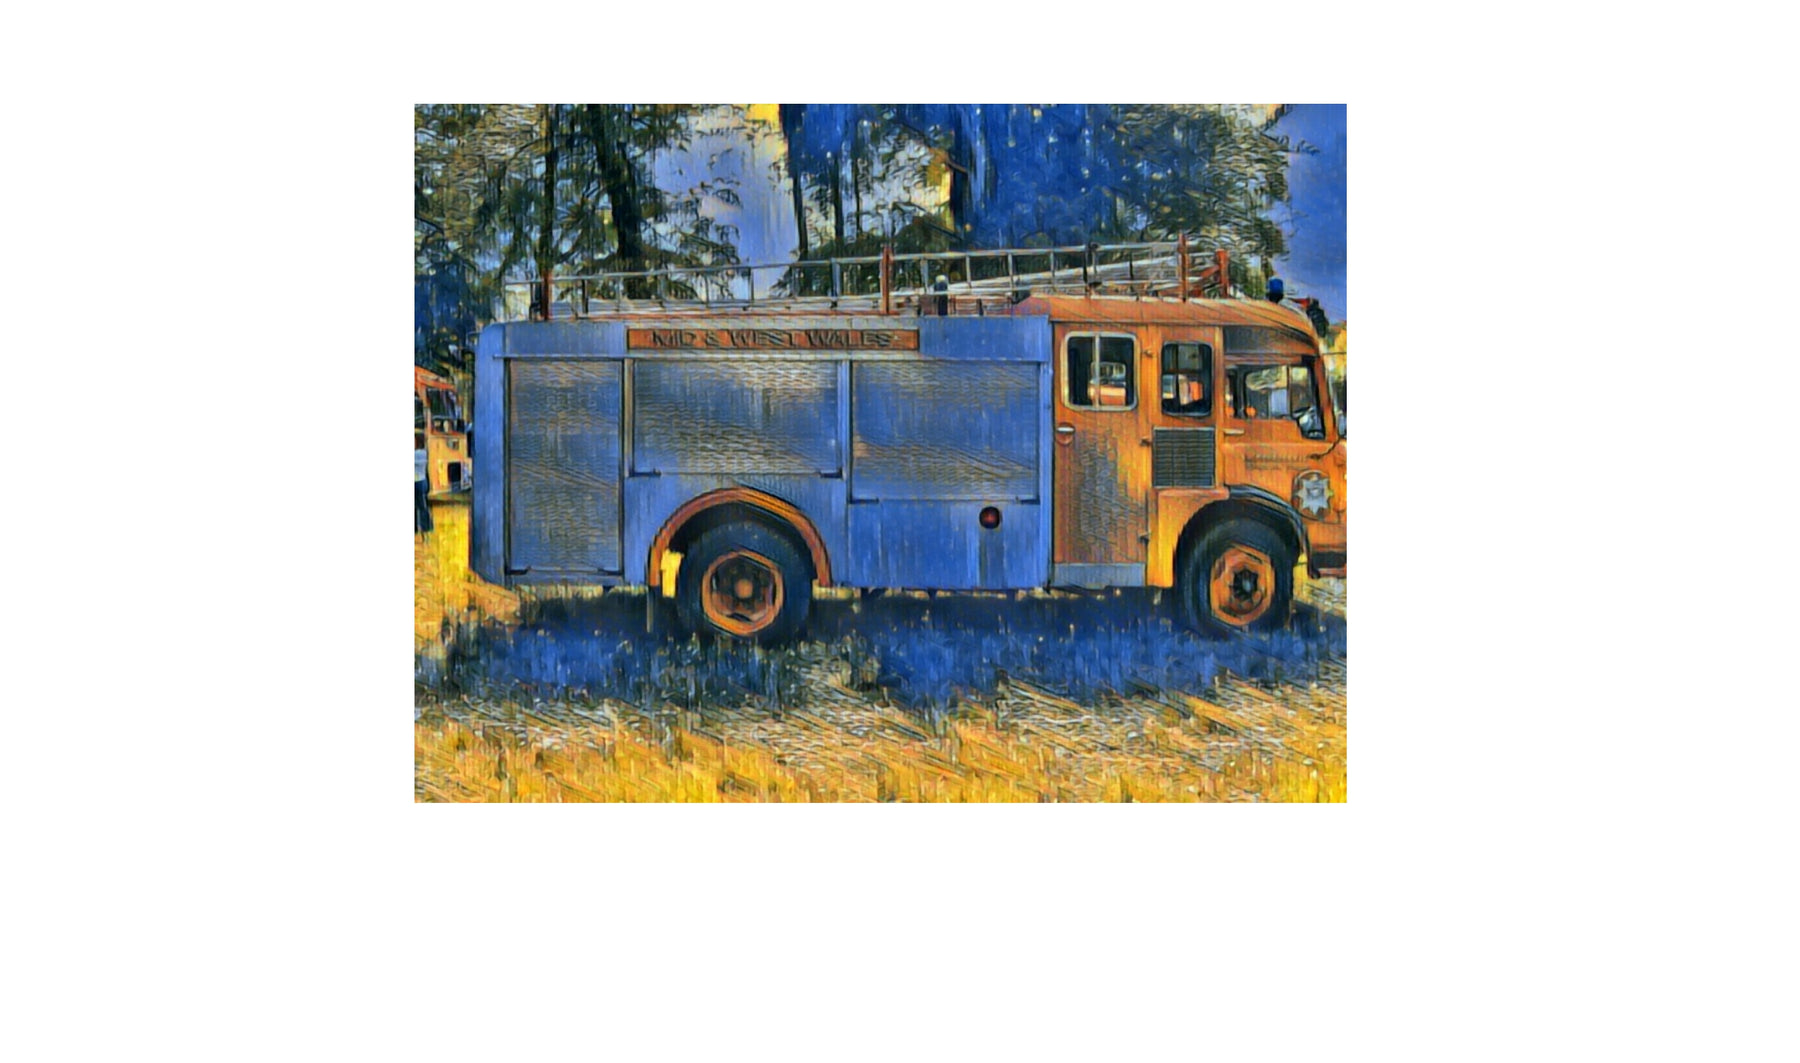 Bedford TK Fire Engine - 15 years ago/Volvo FL today.